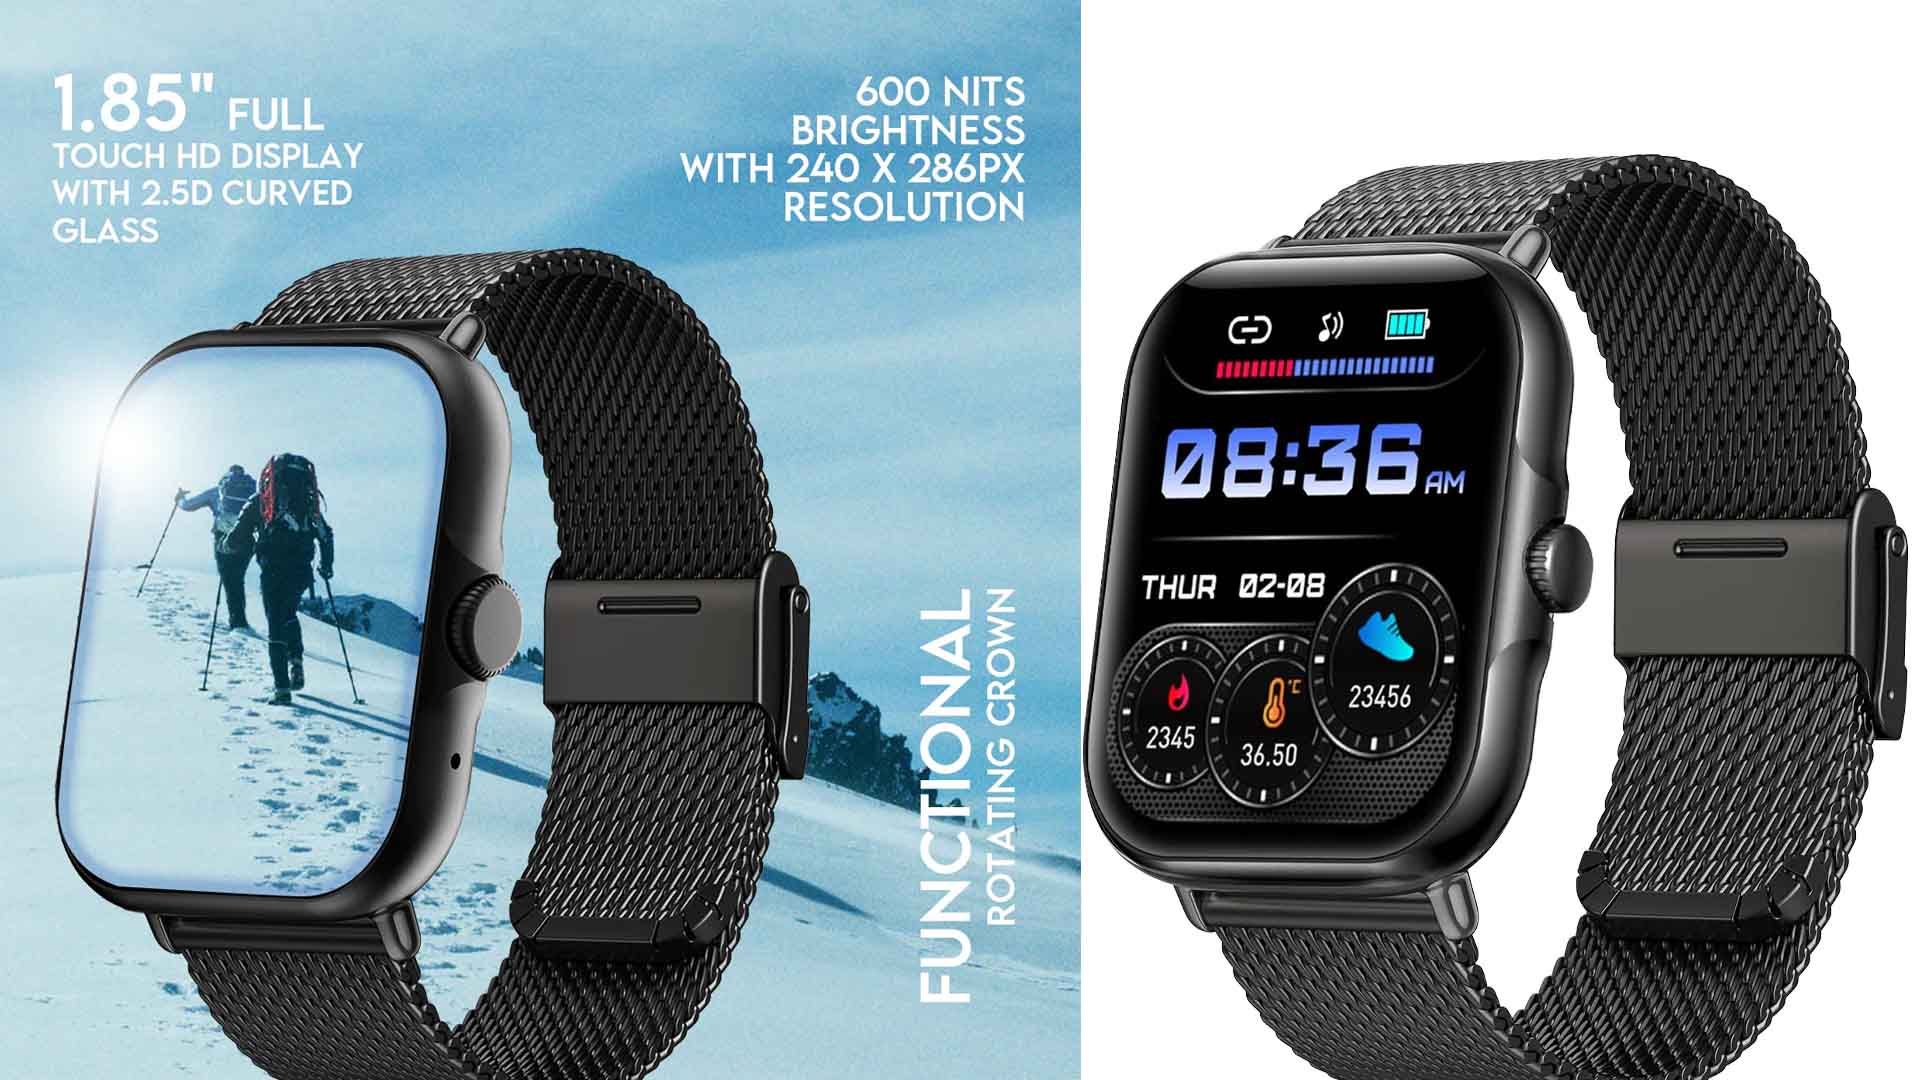 pTron Reflect Callz Smartwatch, Bluetooth Calling, 1.85" Full Touch Display, 600 NITS, Digital Crown, Metal Mesh Strap, 100+ Watch Faces, HR, Sports Mode, 5 Days Battery Life